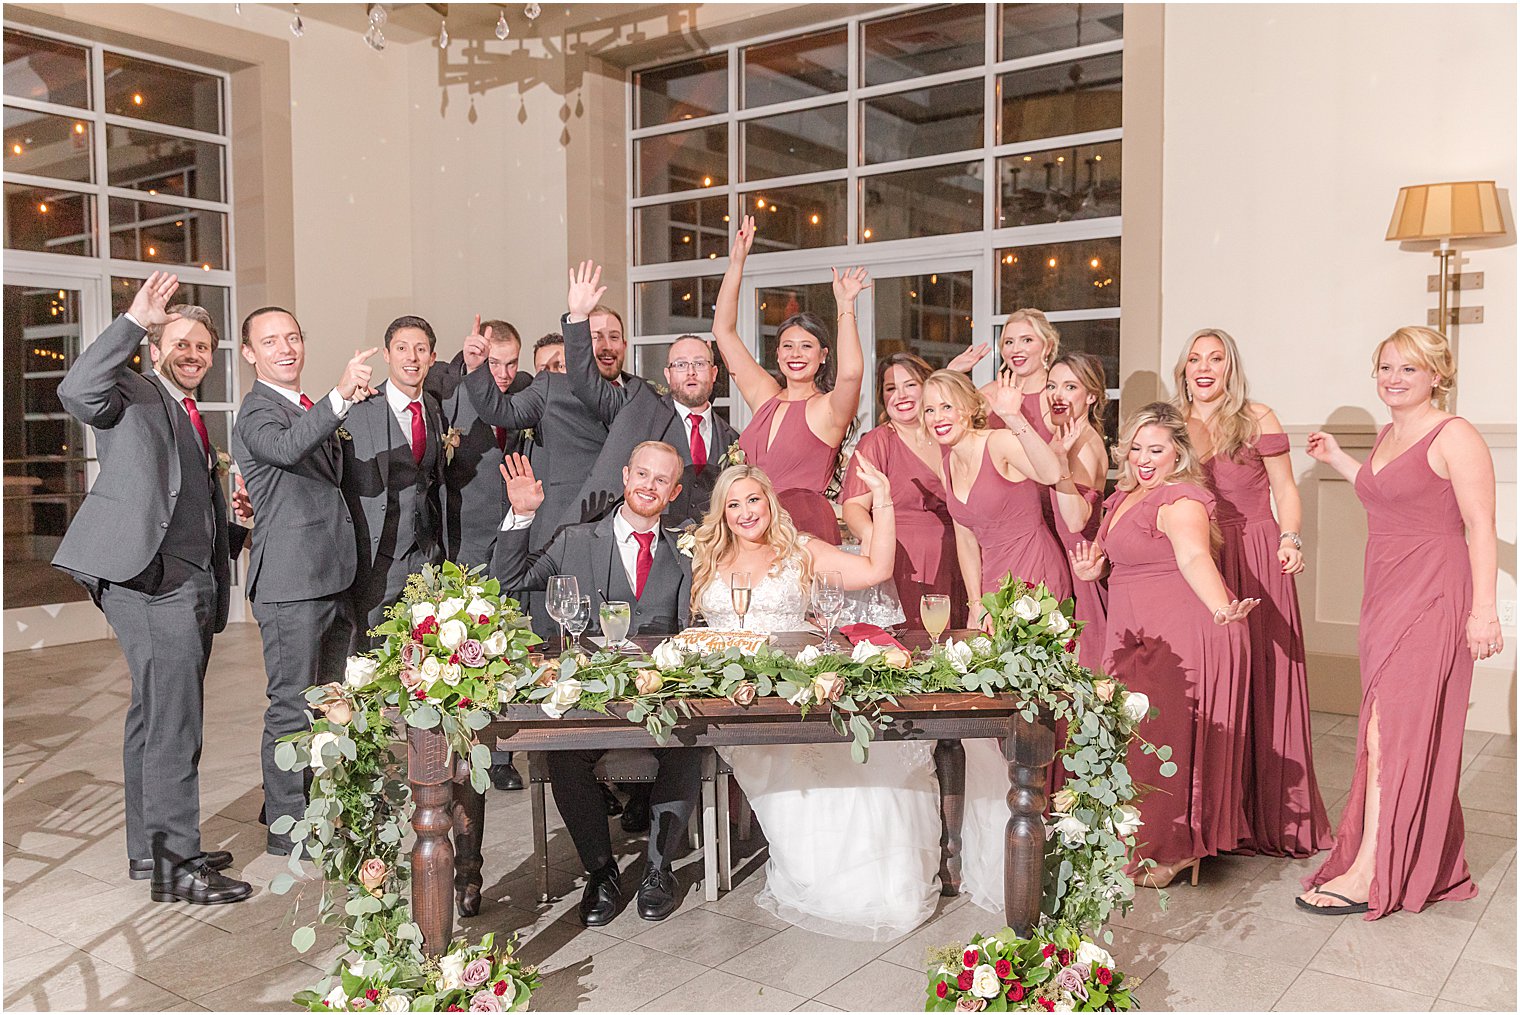 newlyweds sit at table with wedding party surrounding them